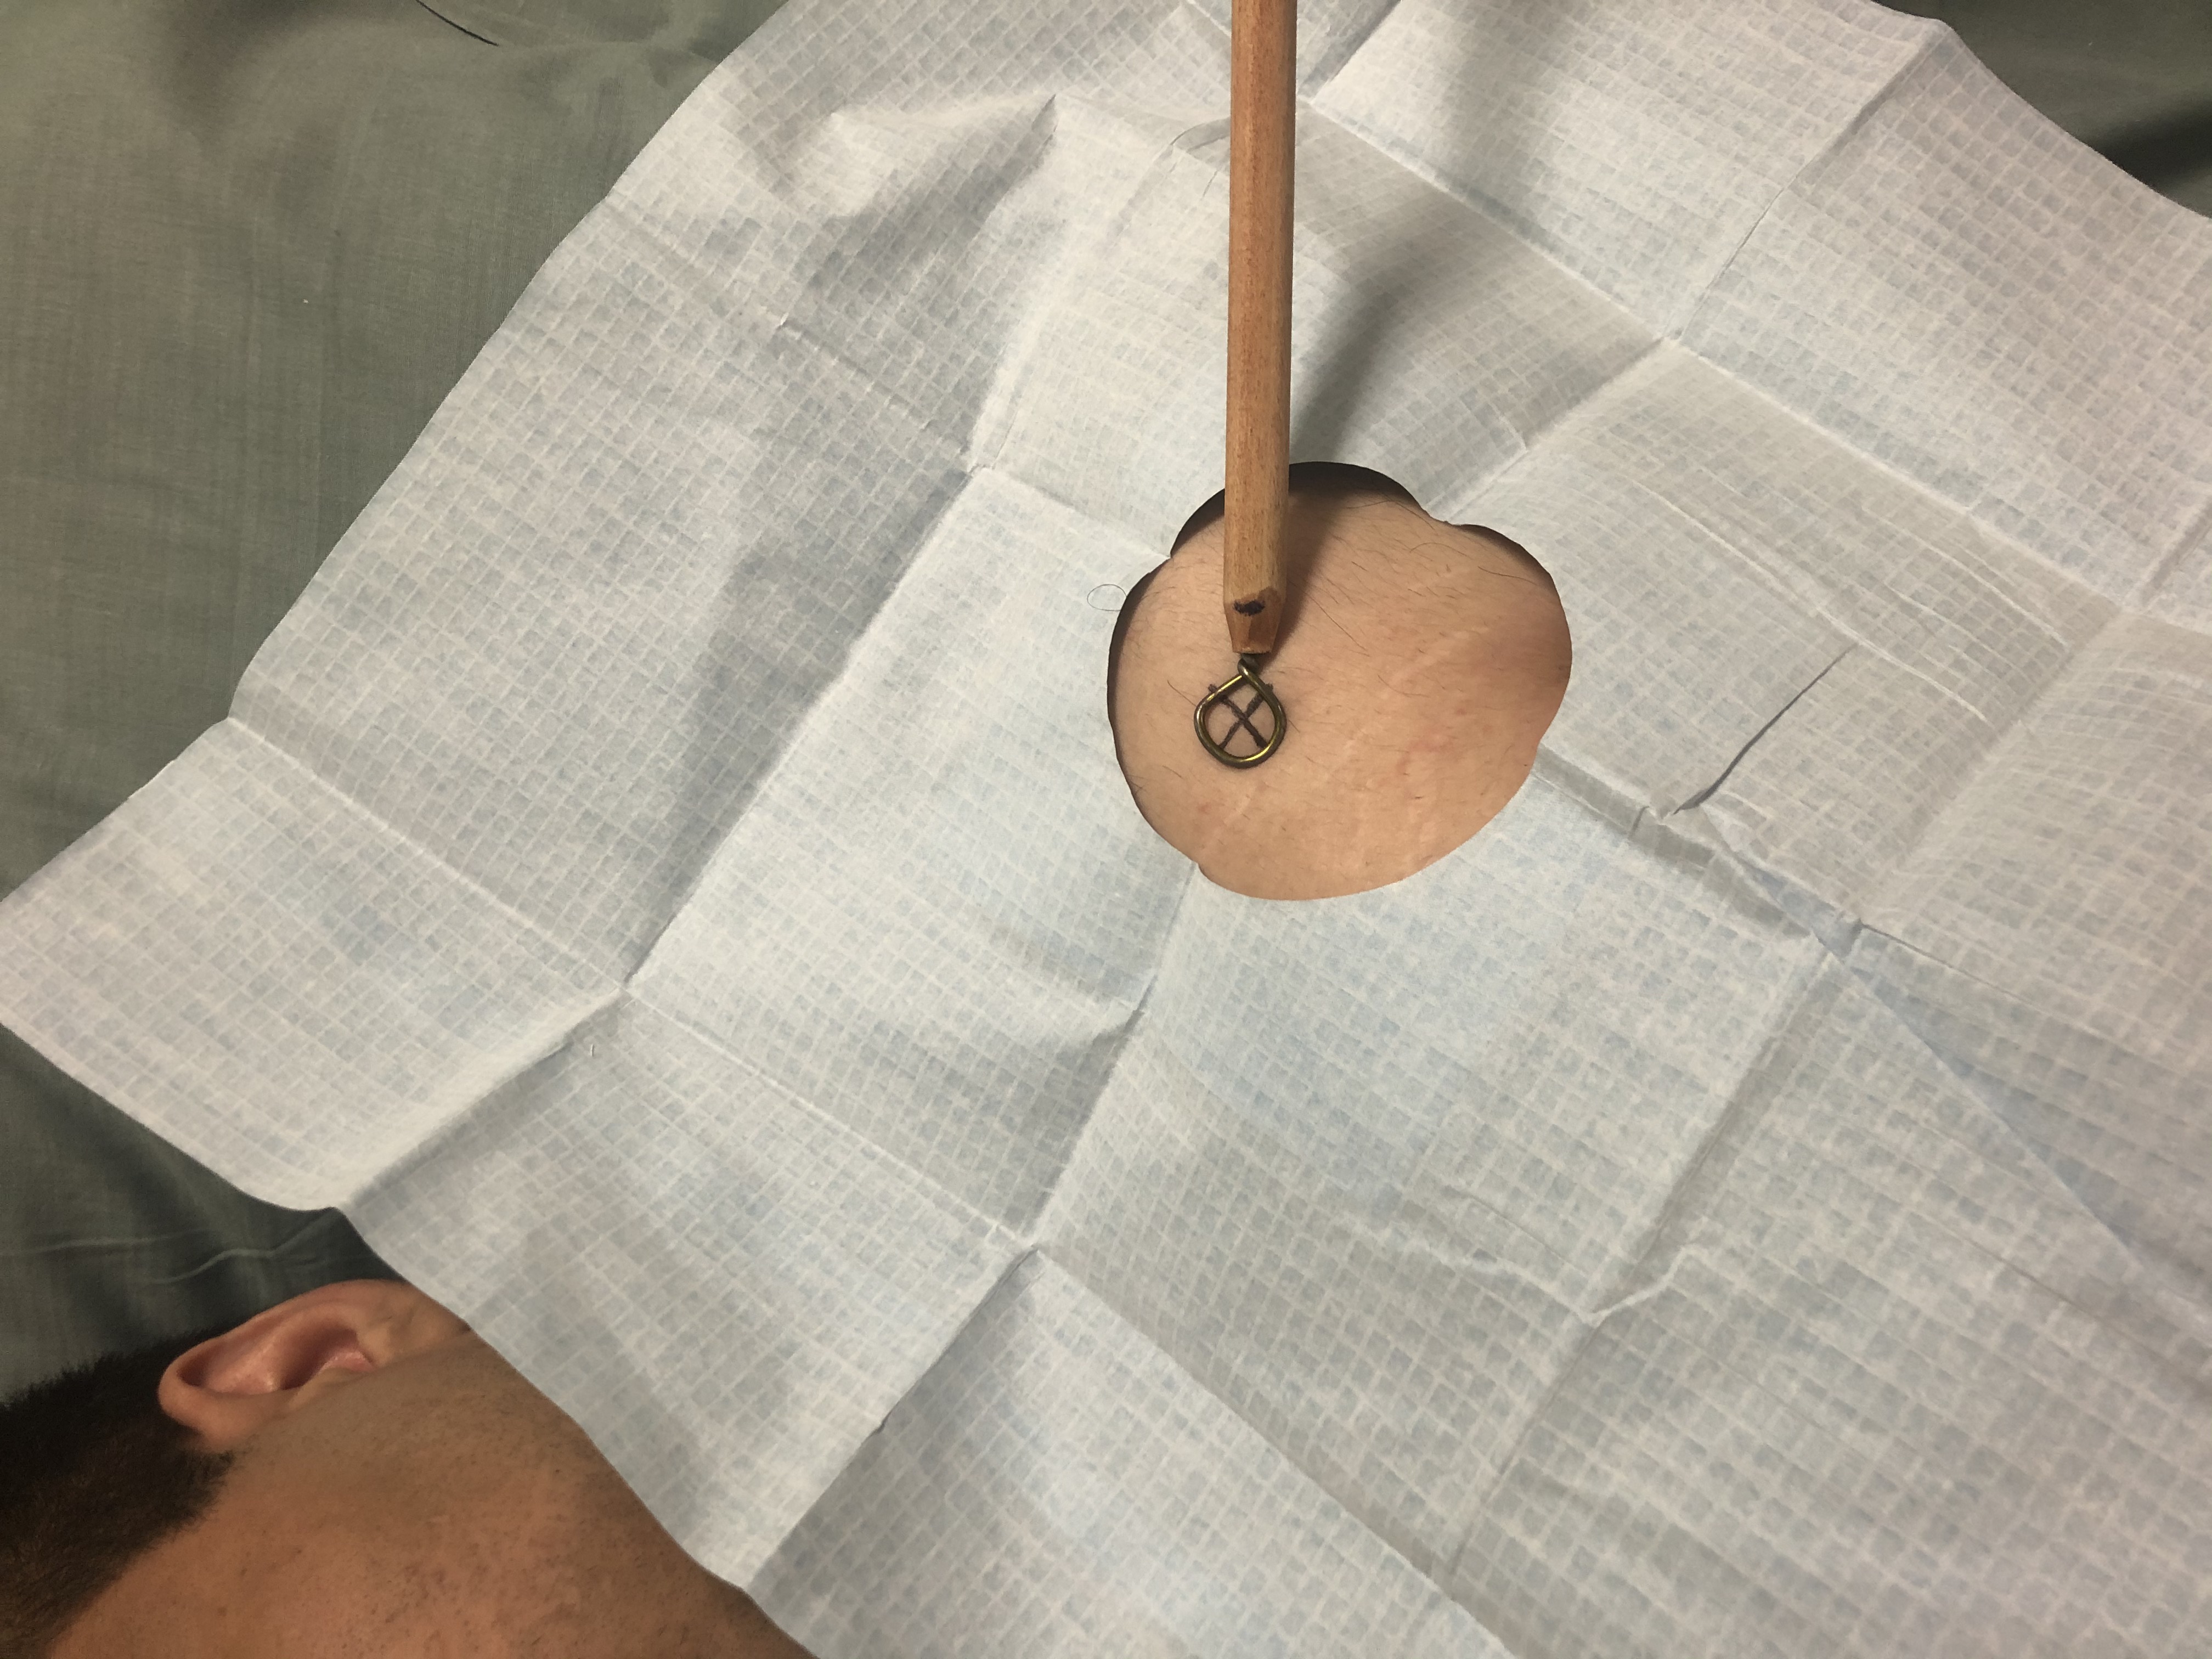 A metallic stick marker is used to assess the location of the skin immediately overlying the glenohumeral joint for a vertical/perpendicular needle approach for injection.